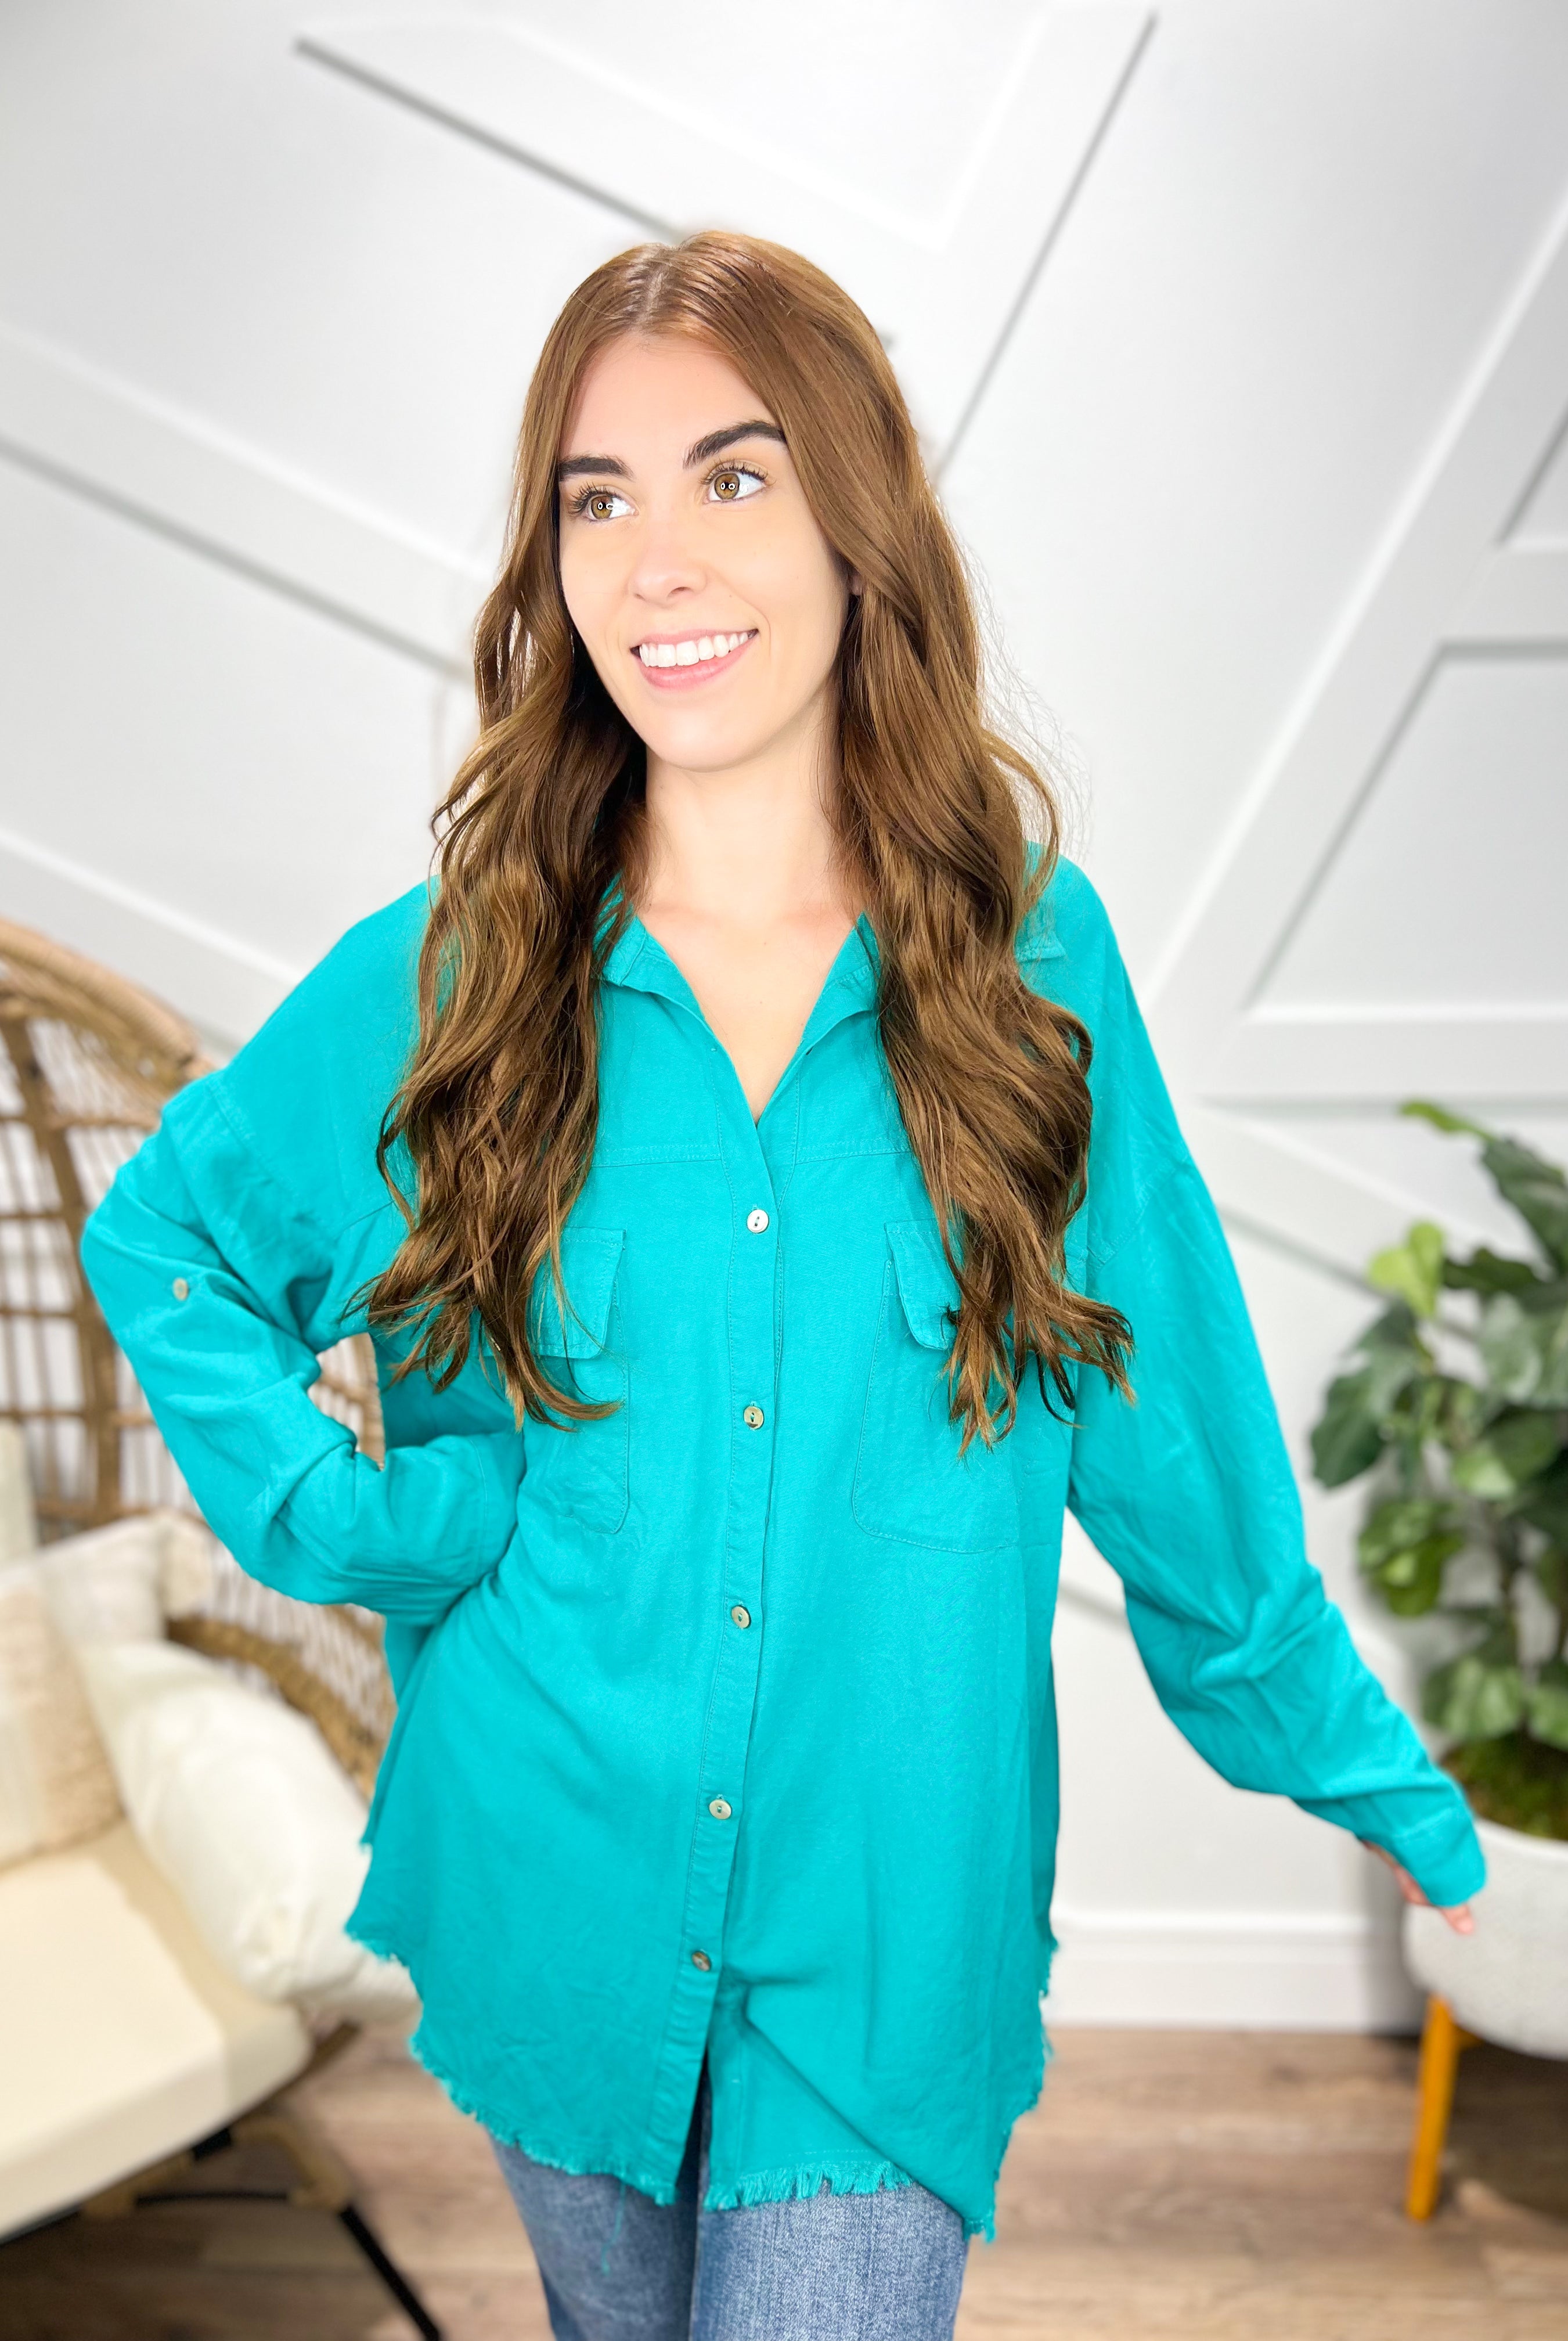 RESTOCK: Any Season Button Down Top-120 Long Sleeve Tops-White Birch-Heathered Boho Boutique, Women's Fashion and Accessories in Palmetto, FL